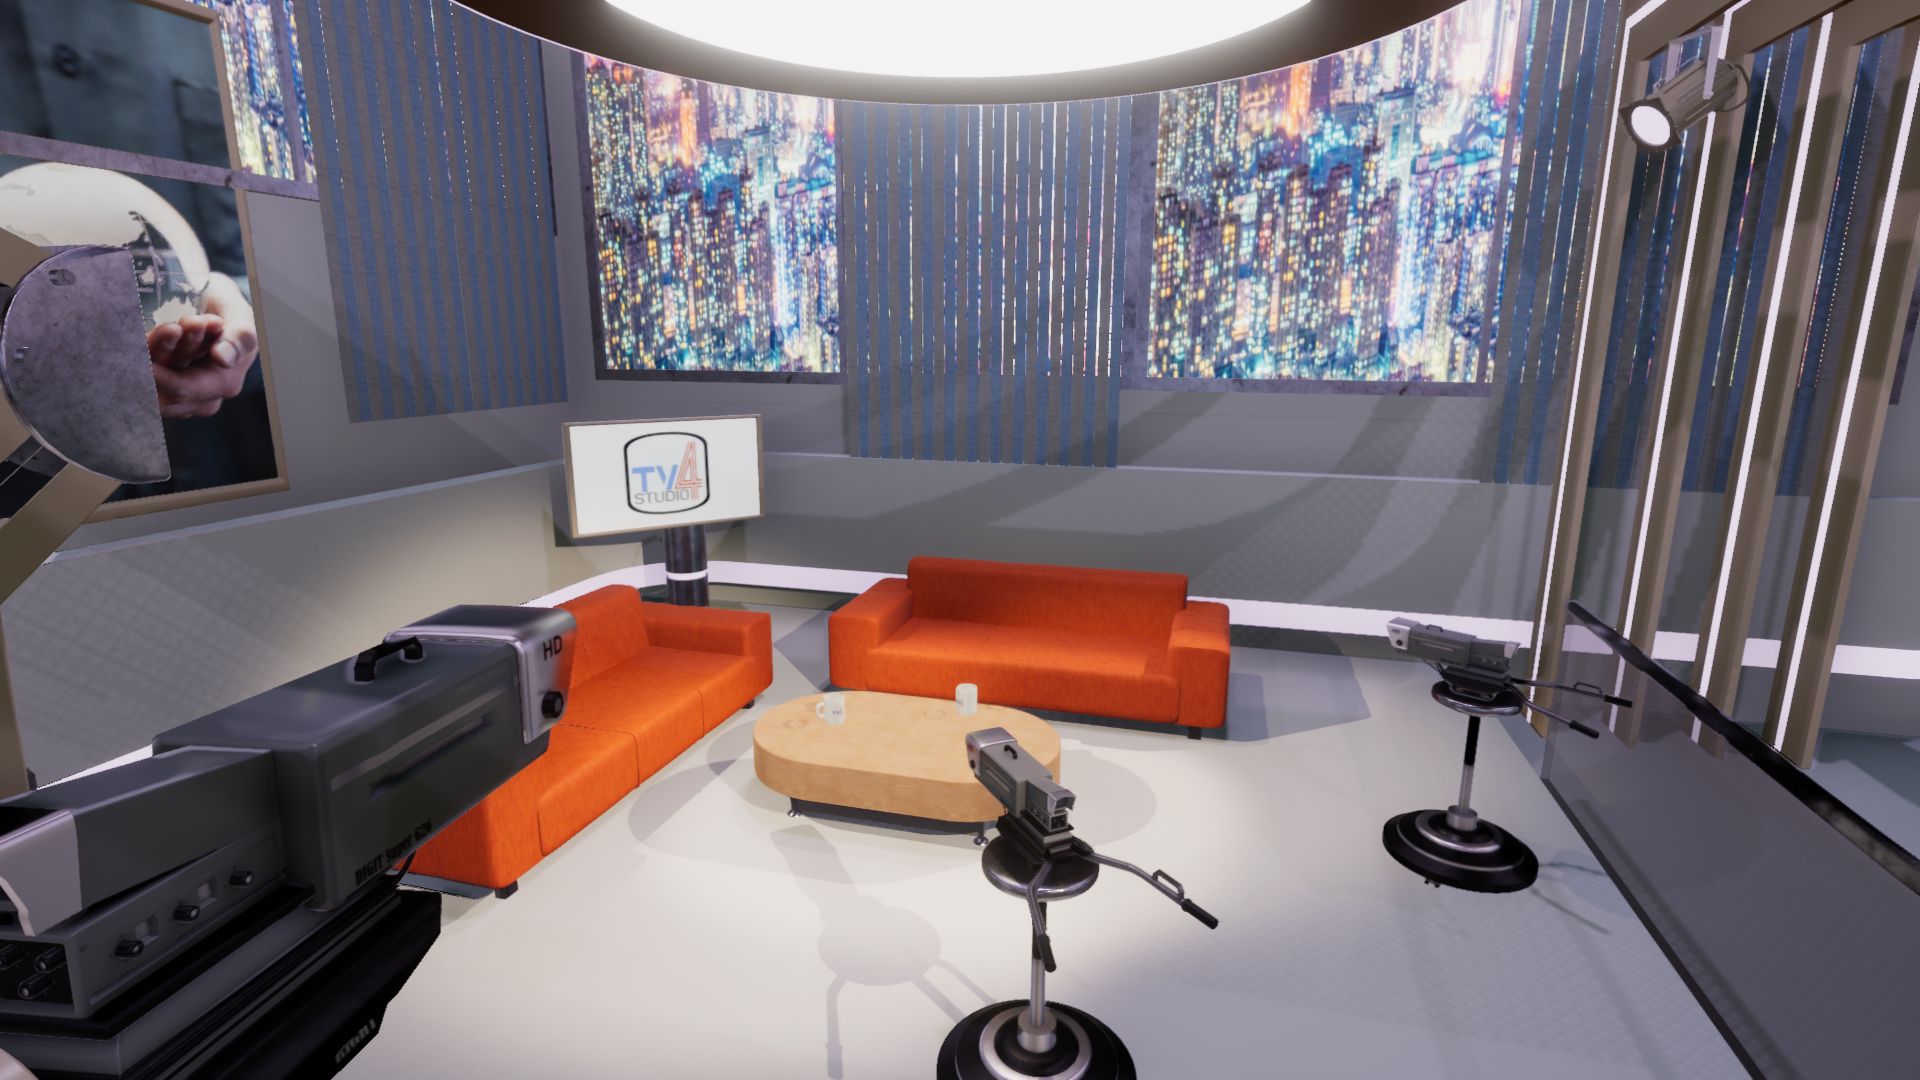 An image showing TV Studio 4. asset pack, created with Unity Engine.